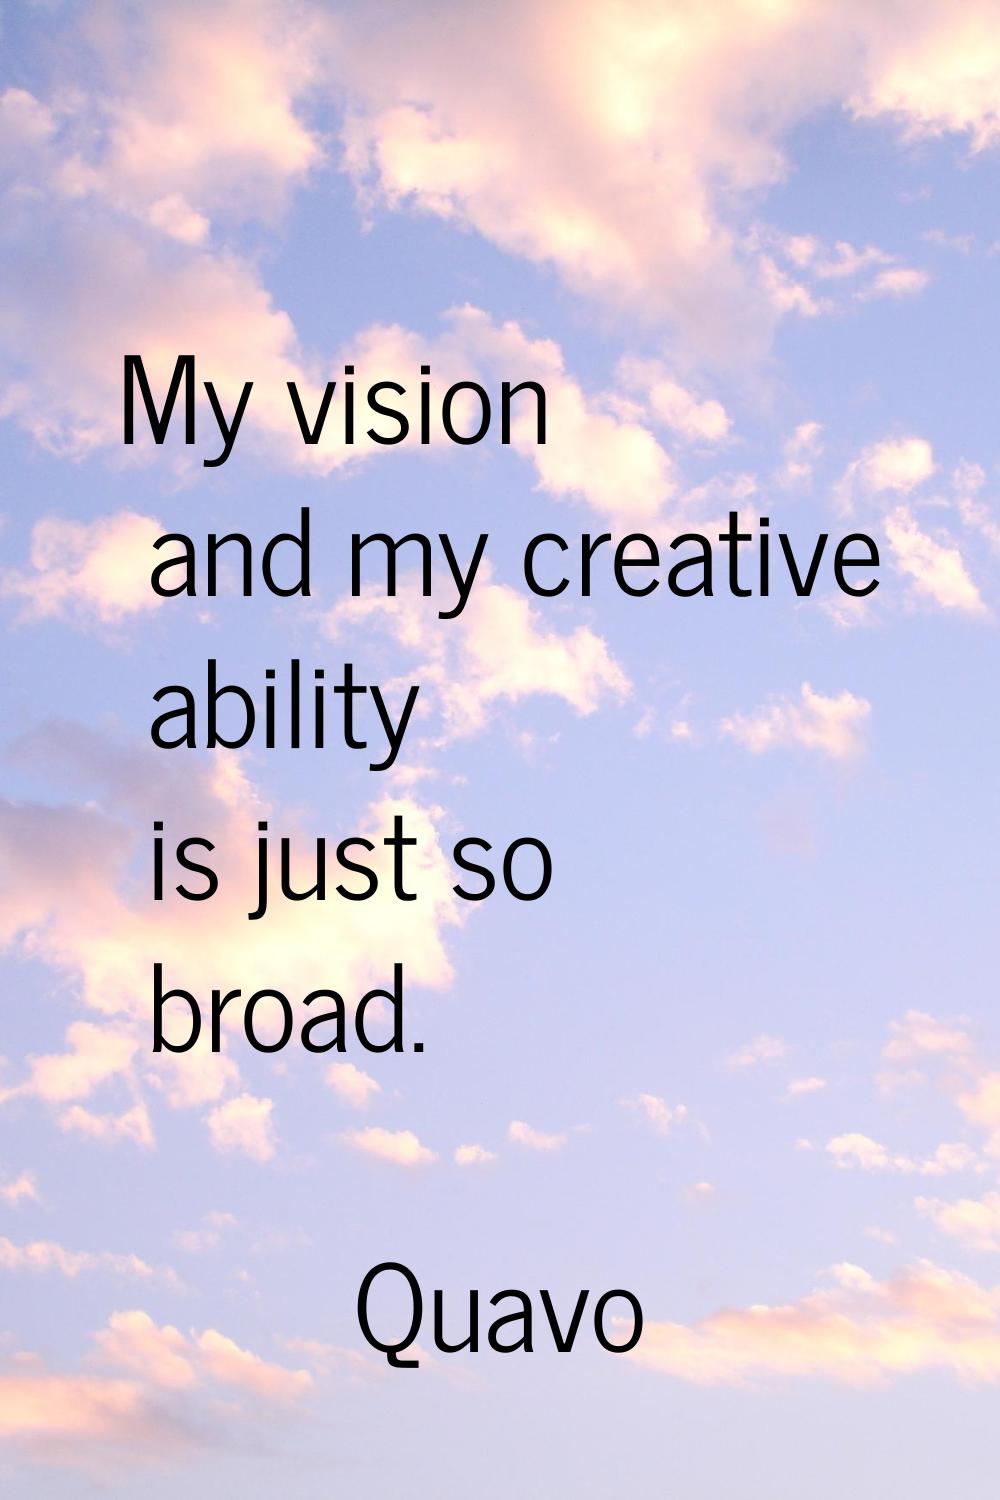 My vision and my creative ability is just so broad.